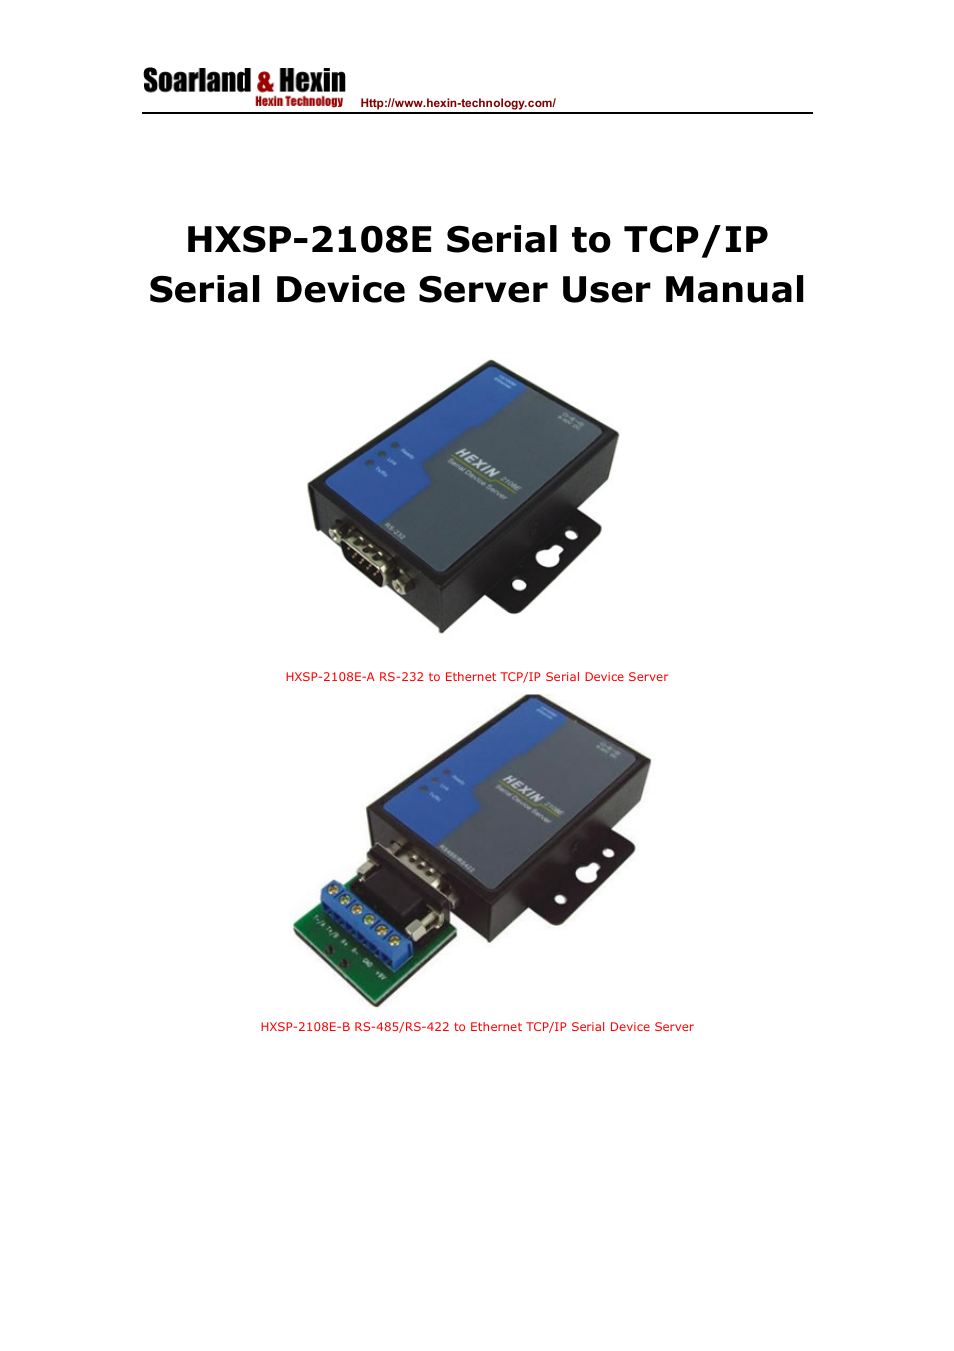 HXSP-2108E-C Rackmount RS-485/RS-422 To Ethernet TCP/IP Serial Device Server